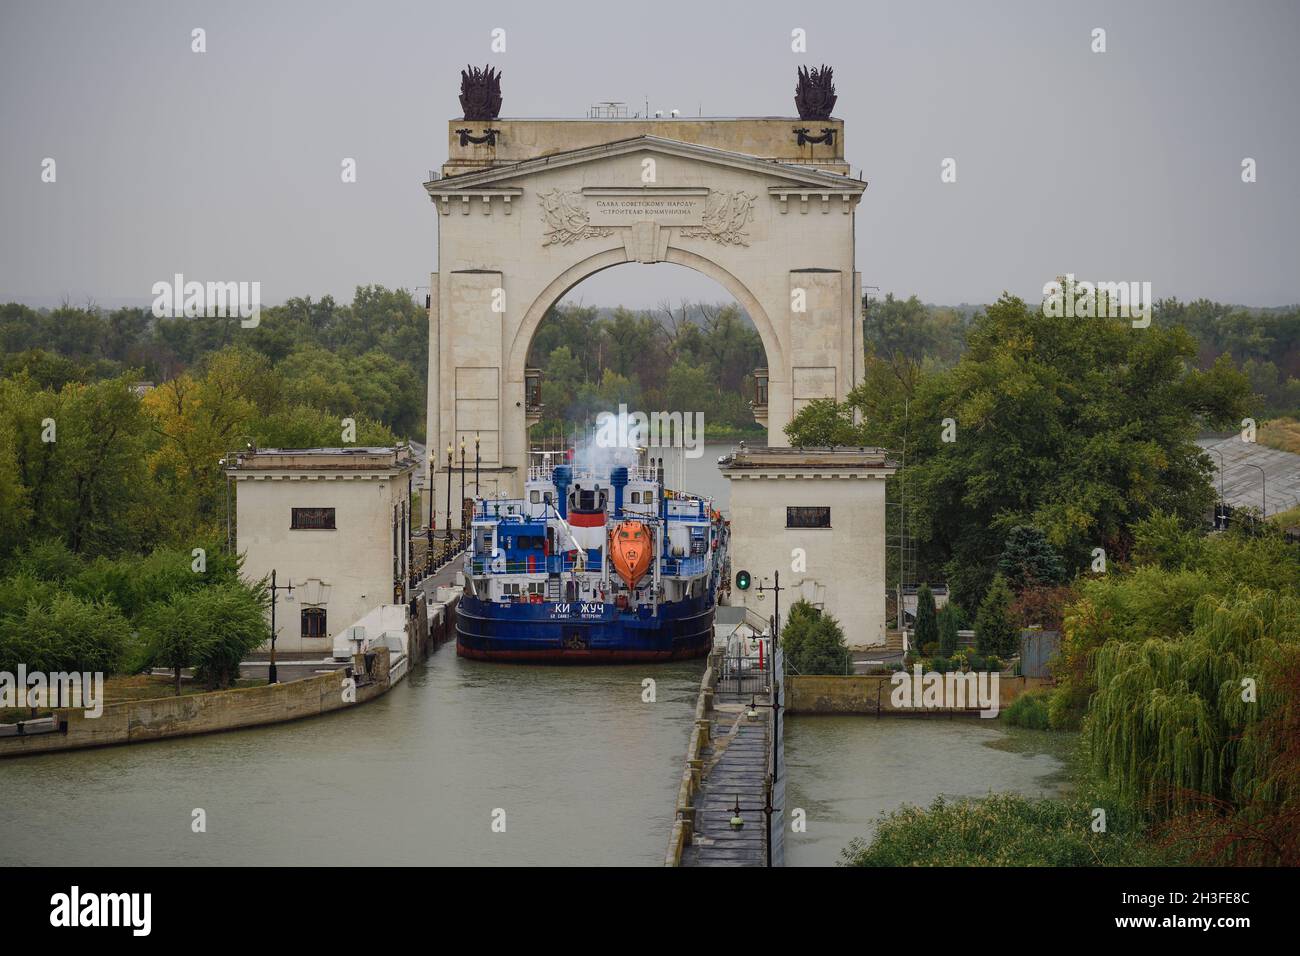 VOLGOGRAD, RUSSIA - SEPTEMBER 20, 2021: Cargo ship 'Kizhuch' enters the first lock of the Volga-Don Canal in a cloudy September day Stock Photo